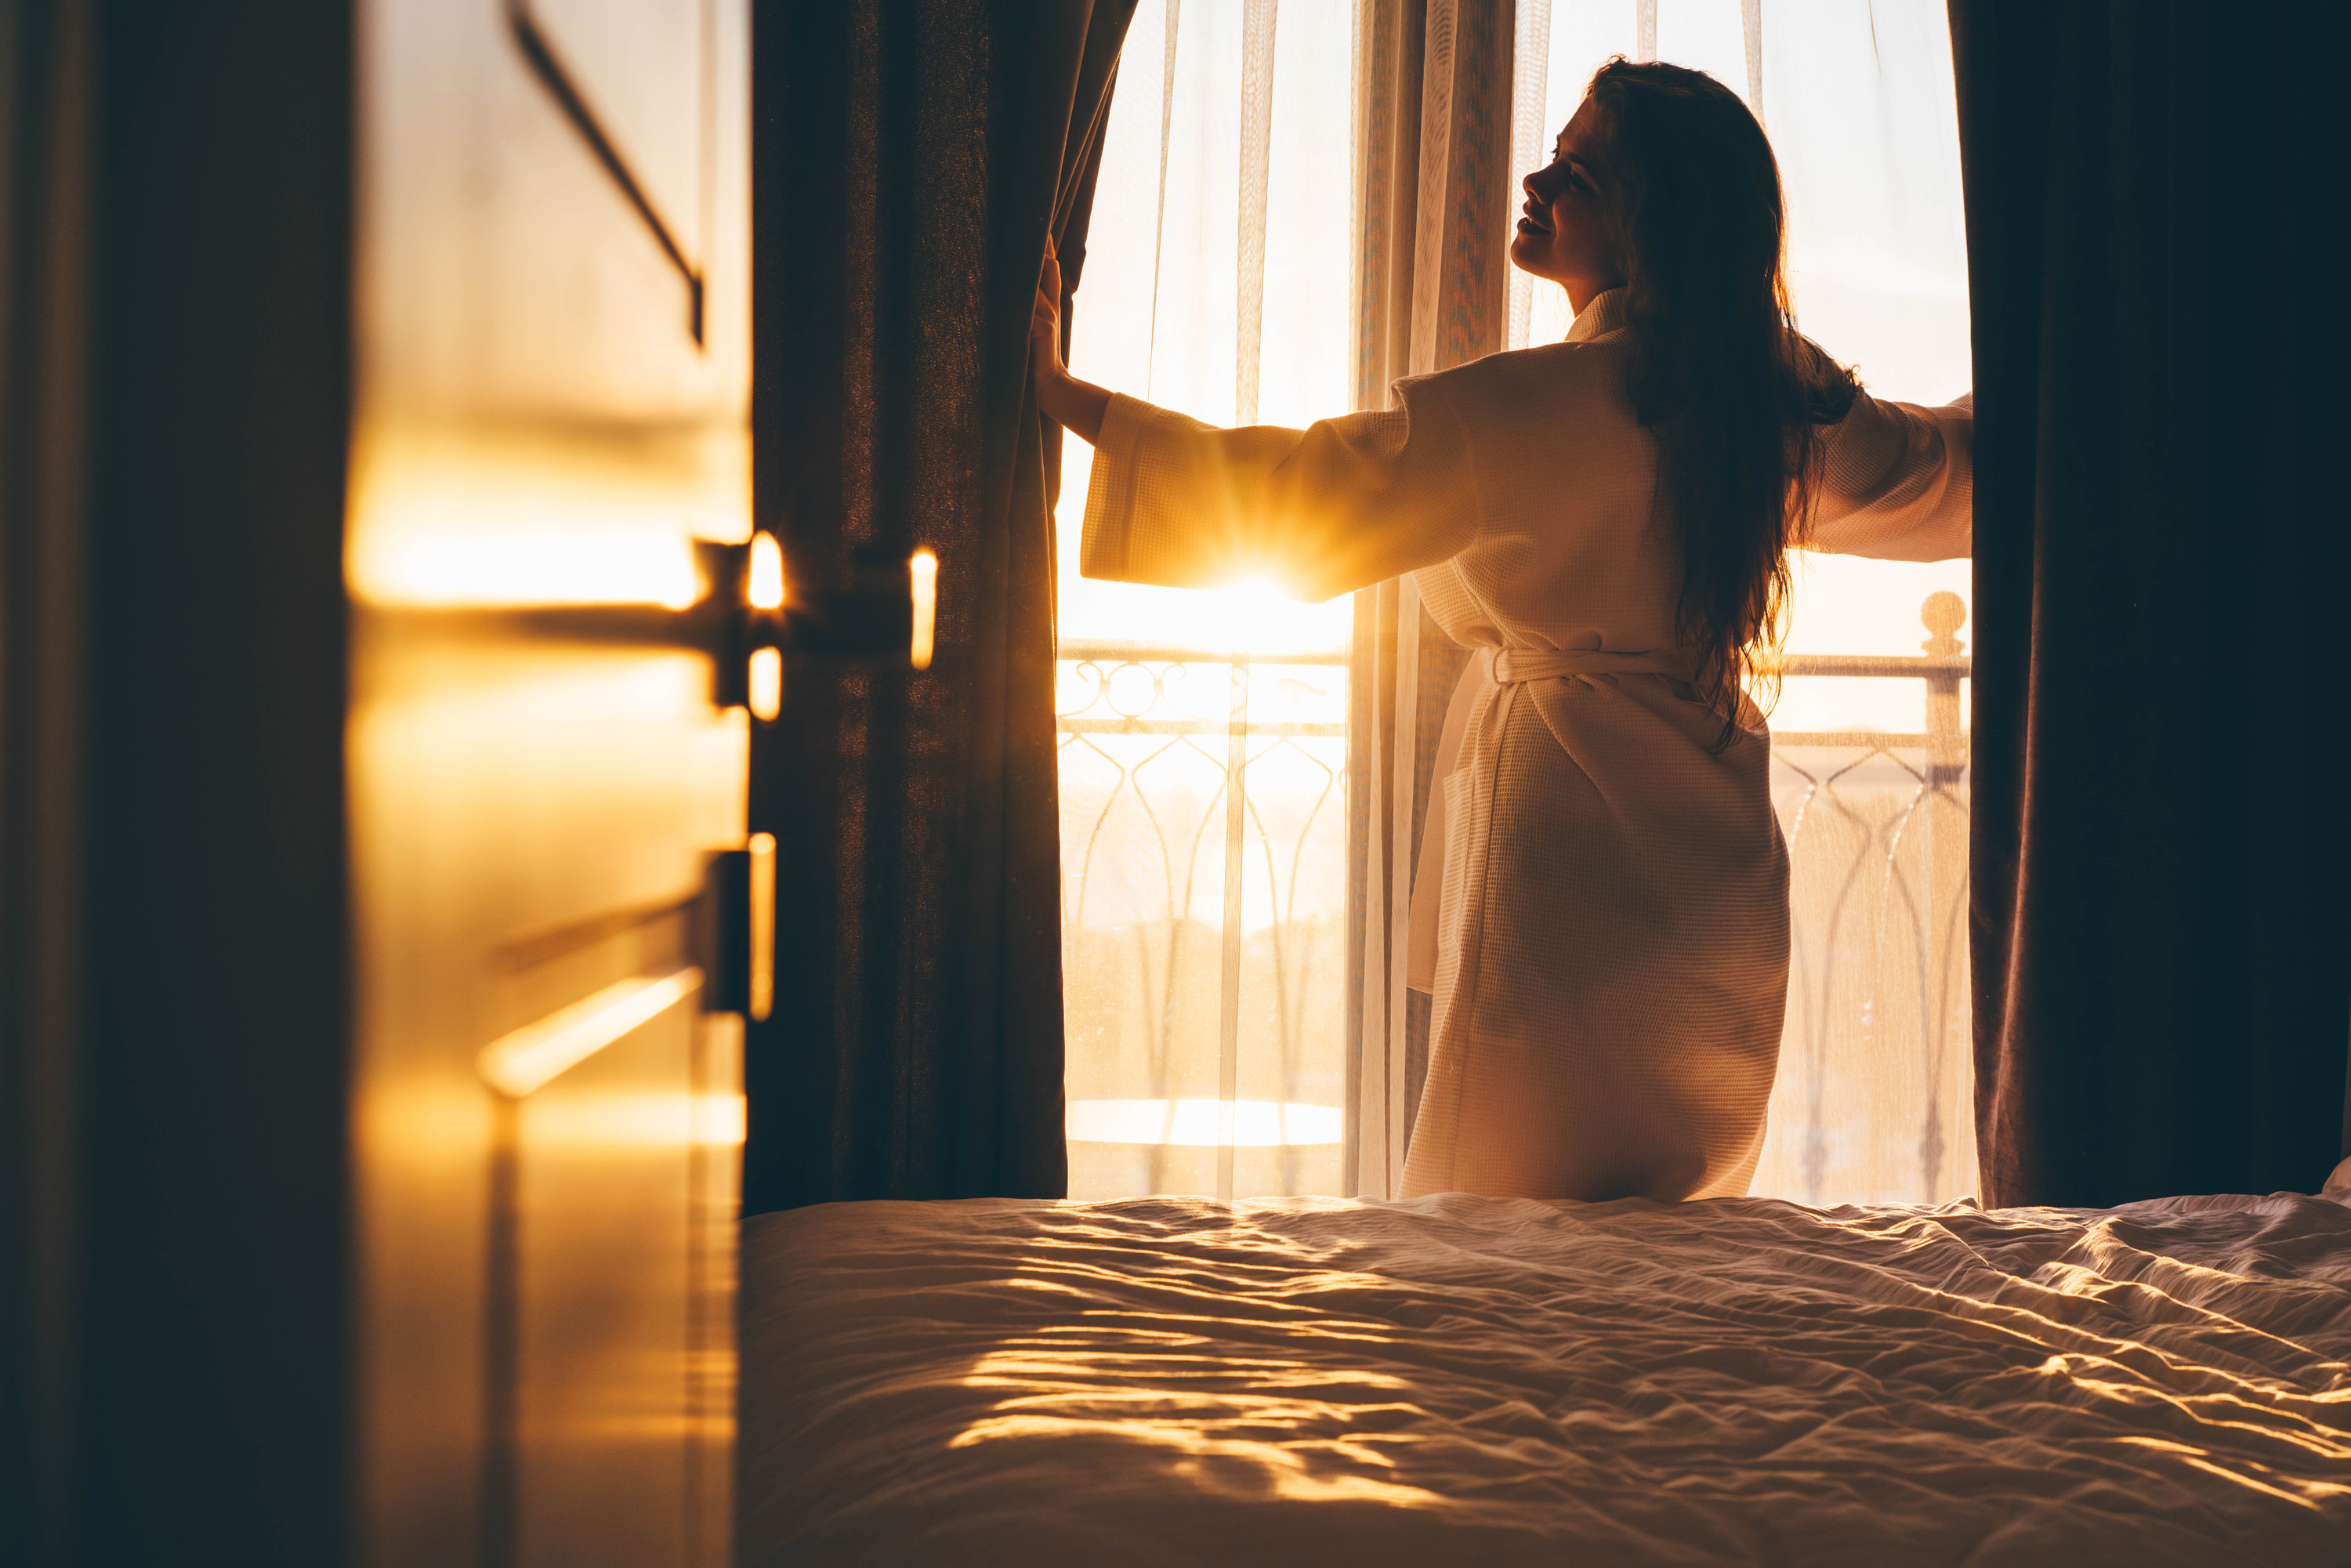 A woman in a bathrobe opens the curtains to a vibrant sunrise